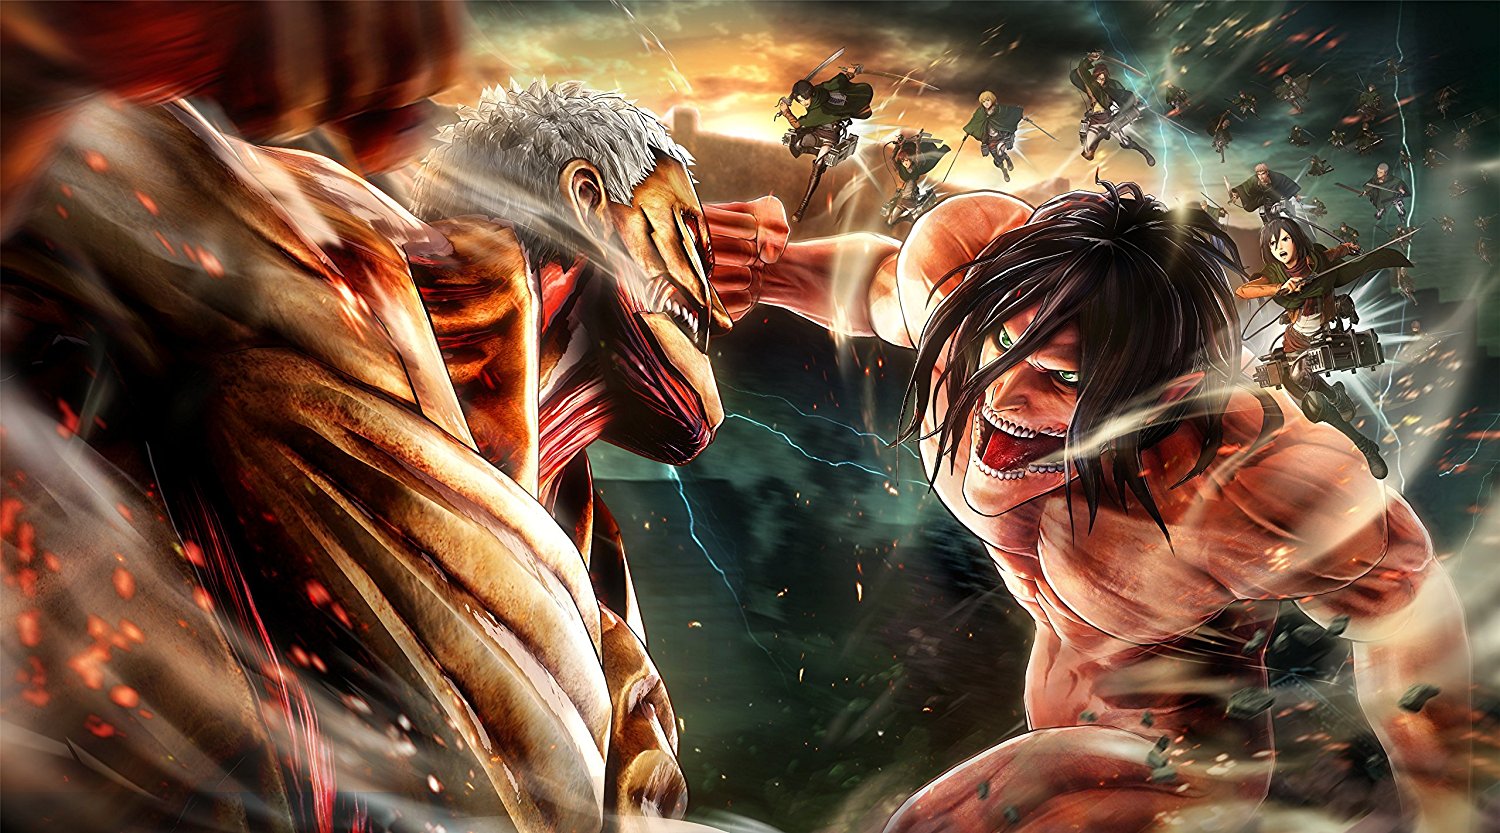 Attack On Titan 2 Video Shows Eren And Levi In Their